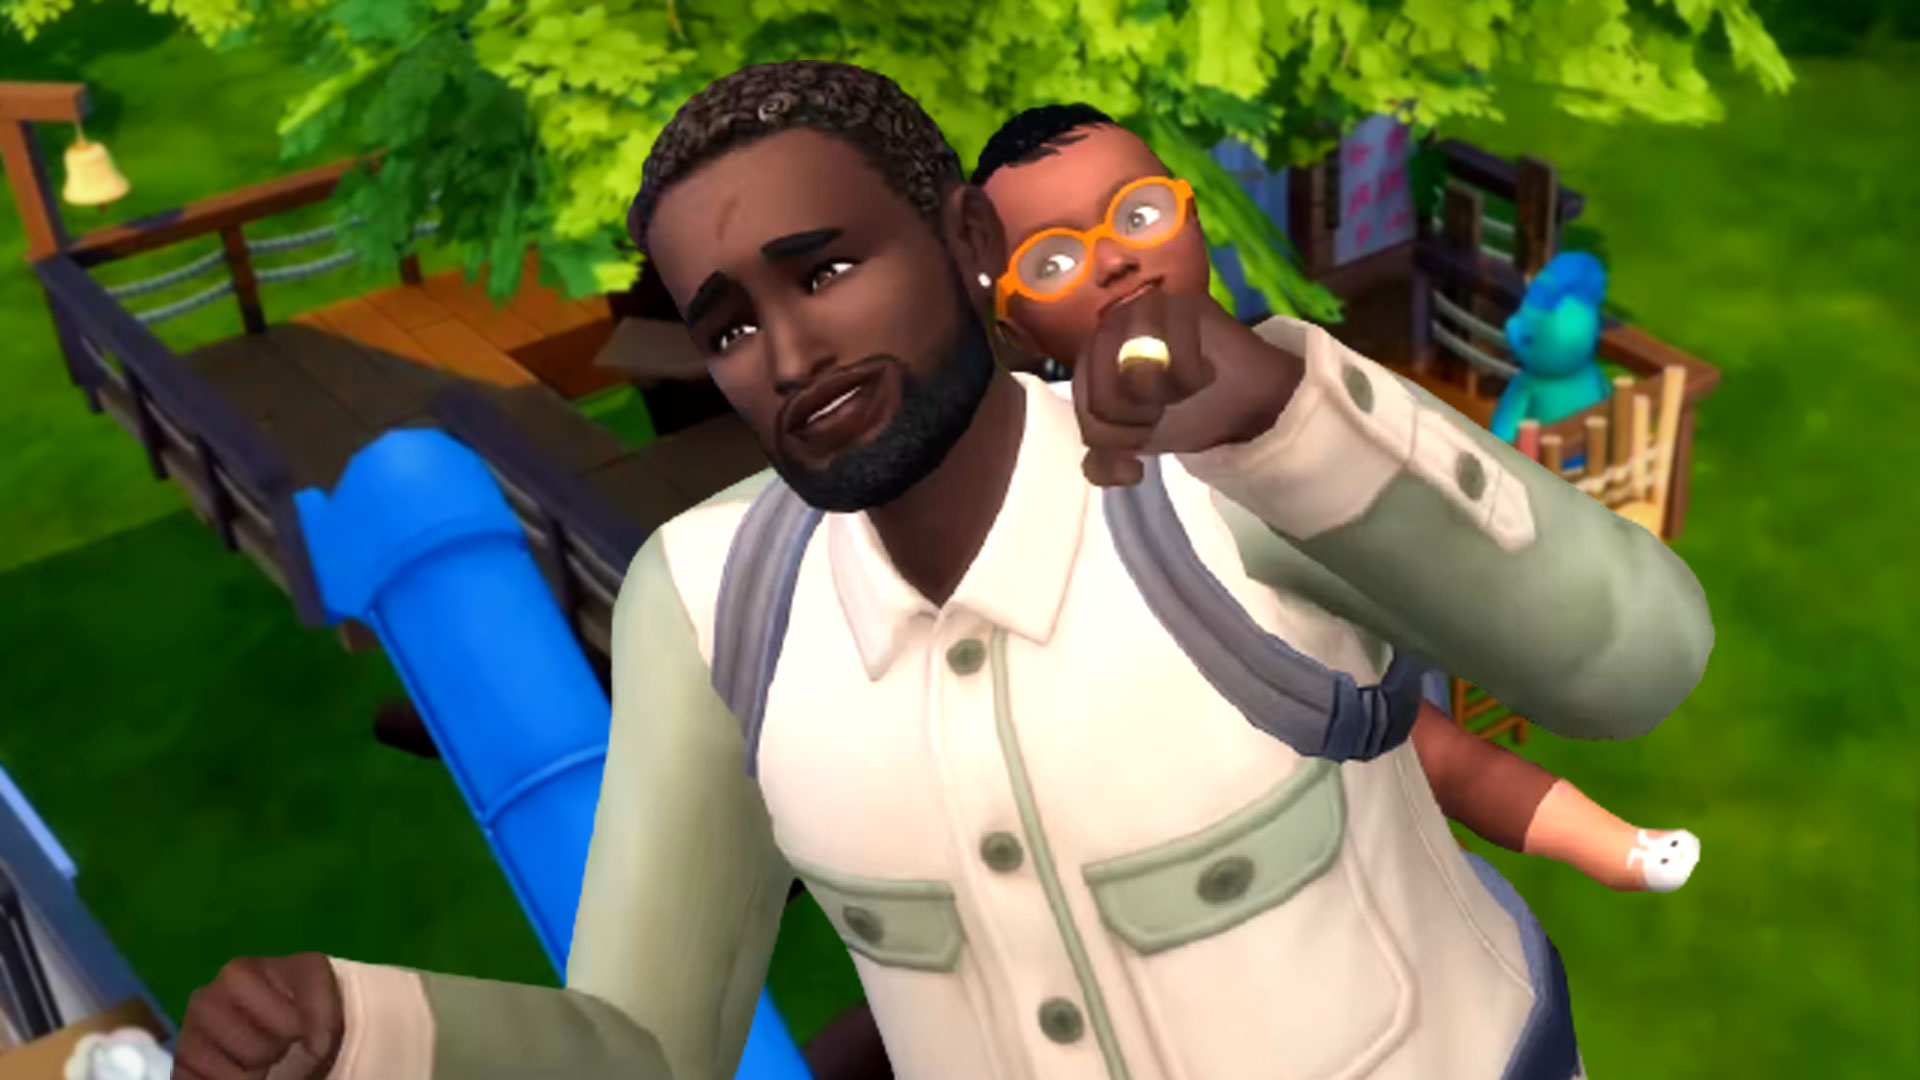 The Sims 4 Growing Together gives you a treehouse, or a midlife crisis